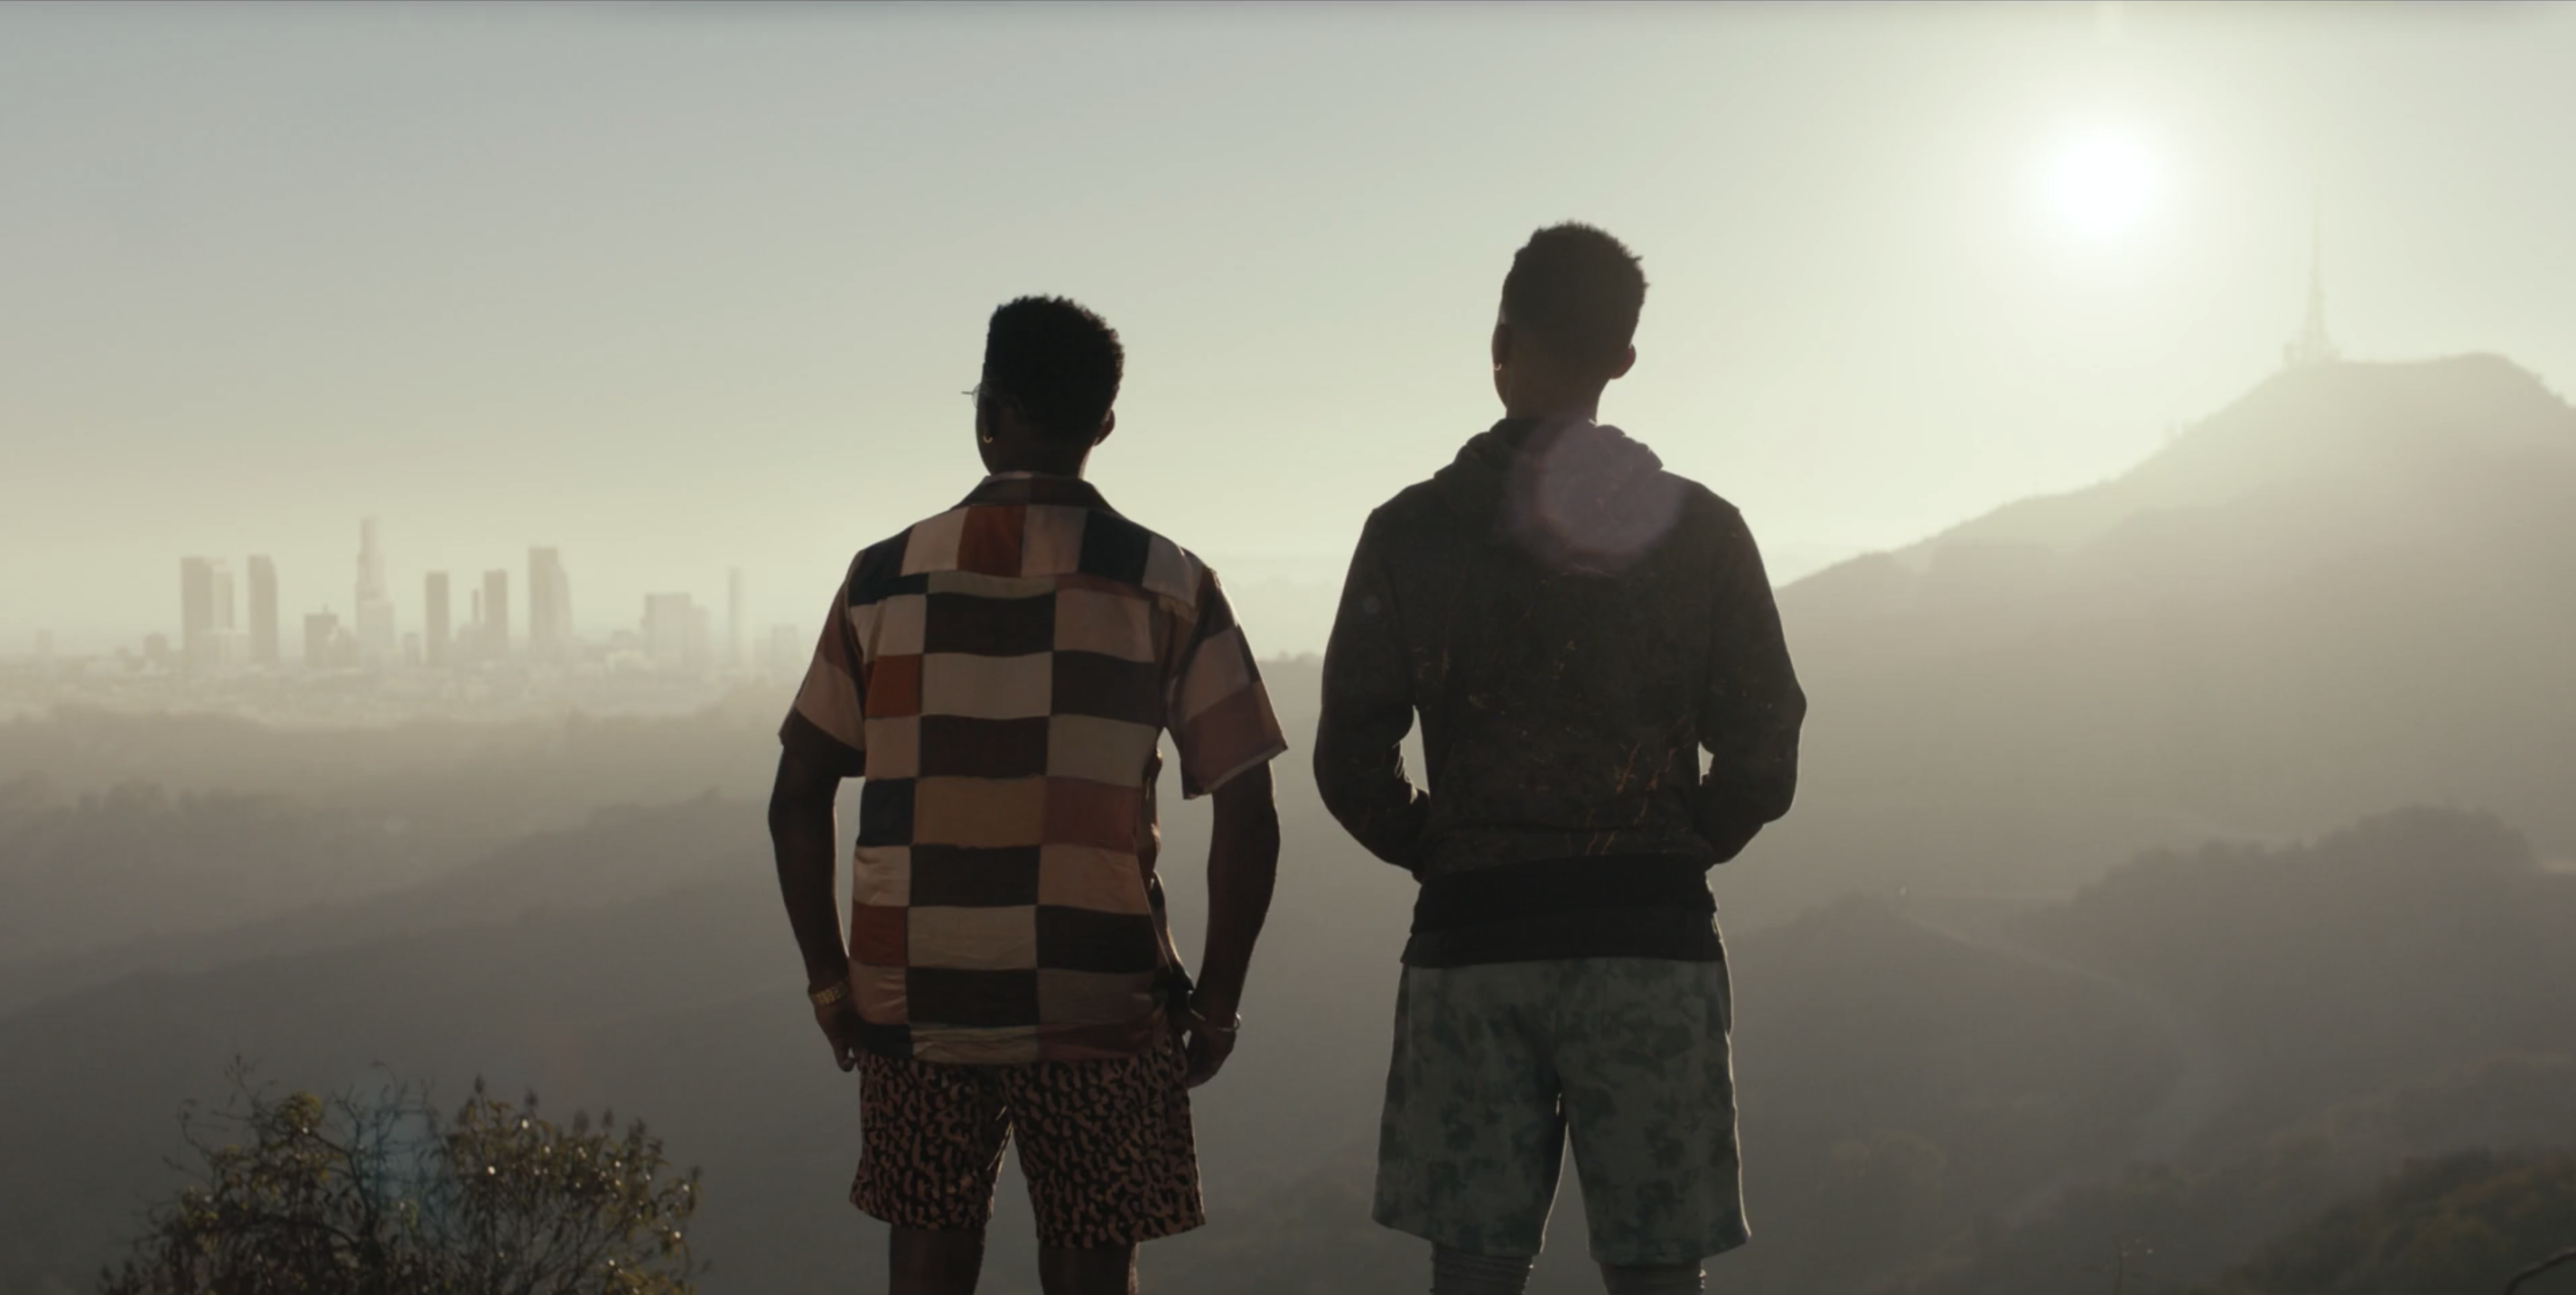 Will and Jordan L. Jones as Jazz stand with their backs to the camera looking out at the view of L.A., with buildings and hills visible in the distance